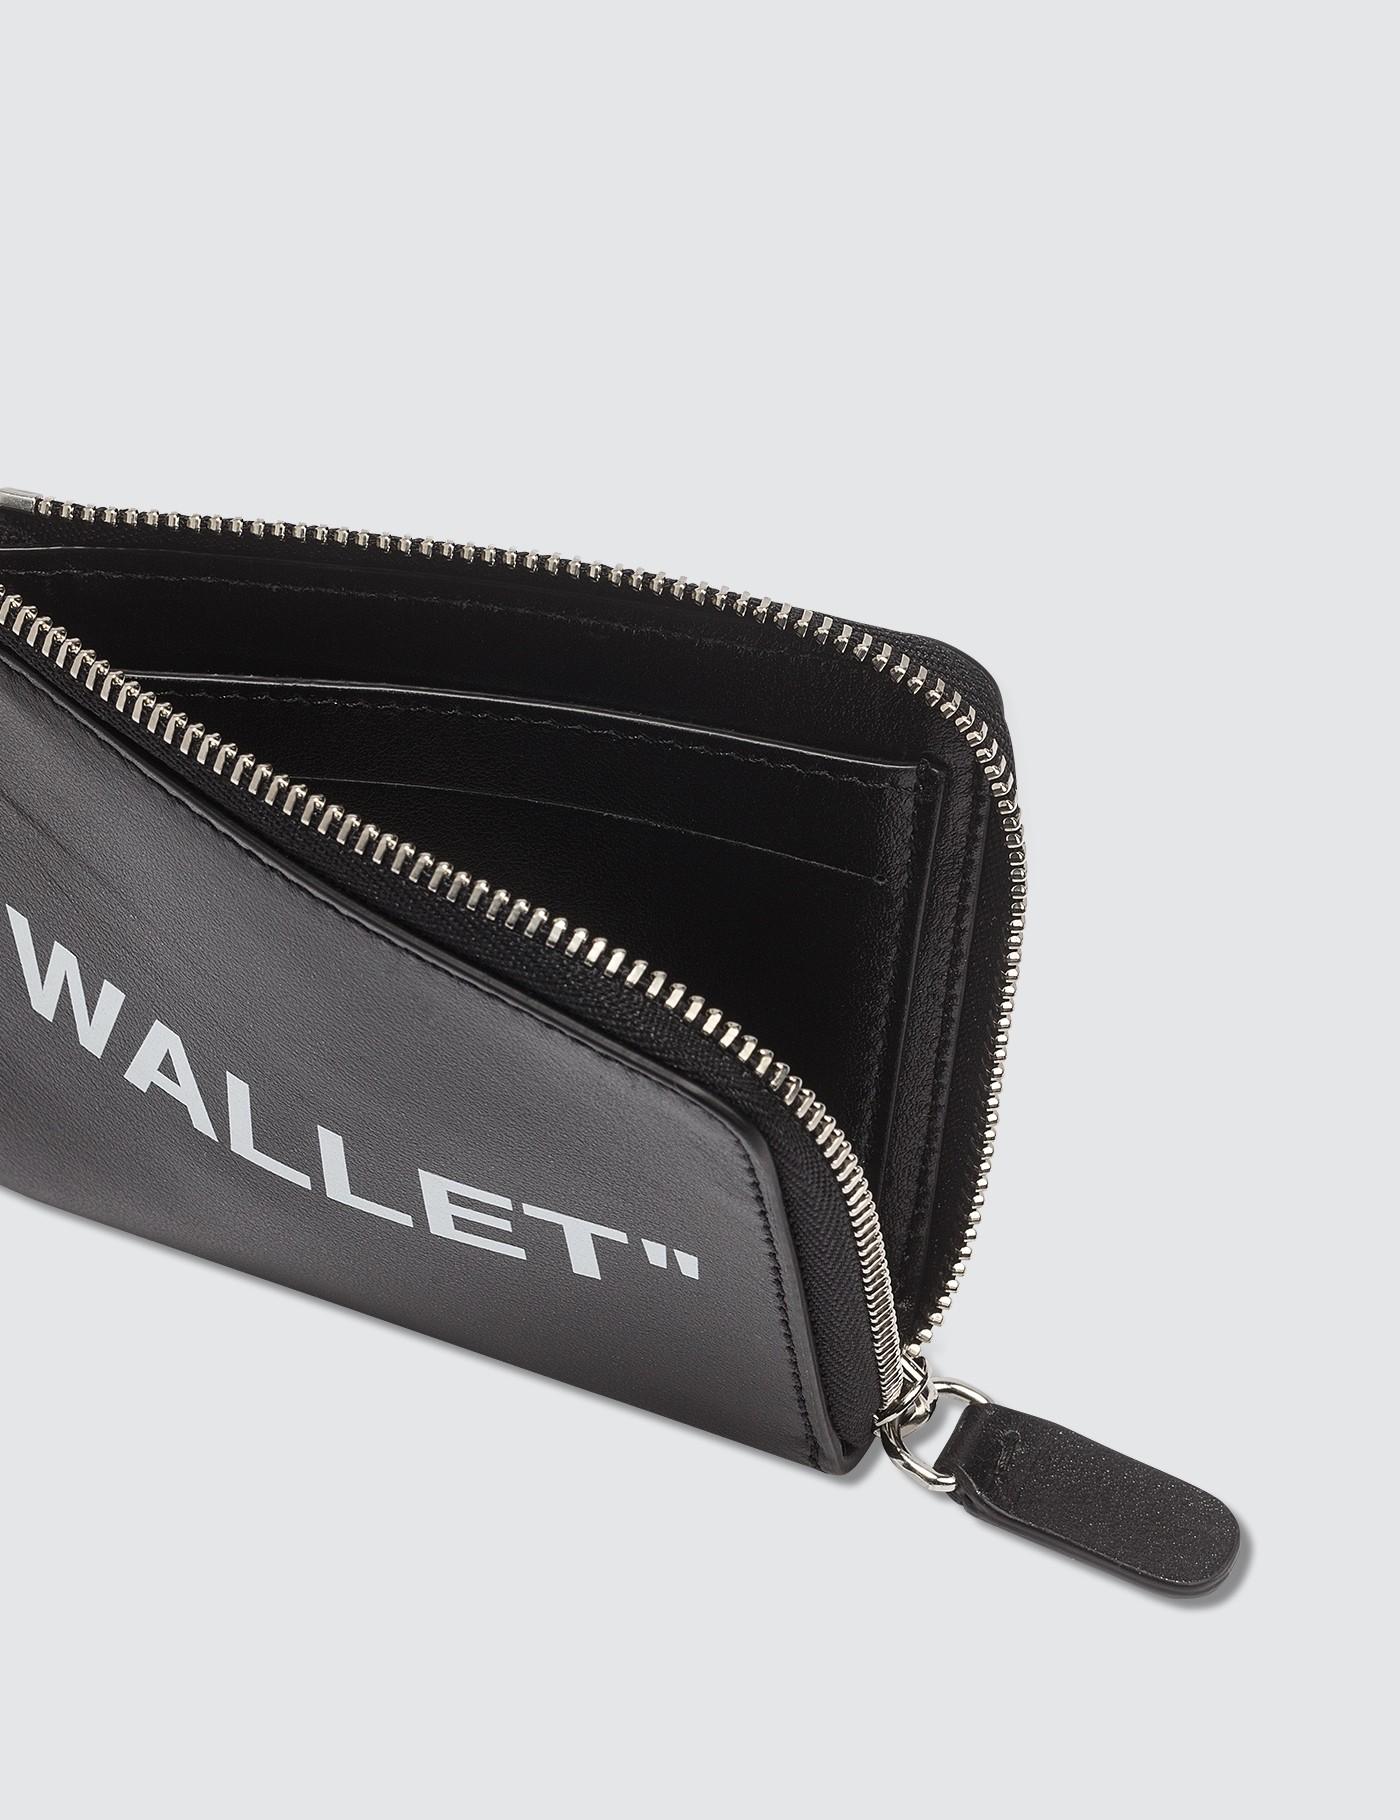 Off-White c/o Virgil Abloh Leather Quote Chain Wallet in Black for Men - Lyst